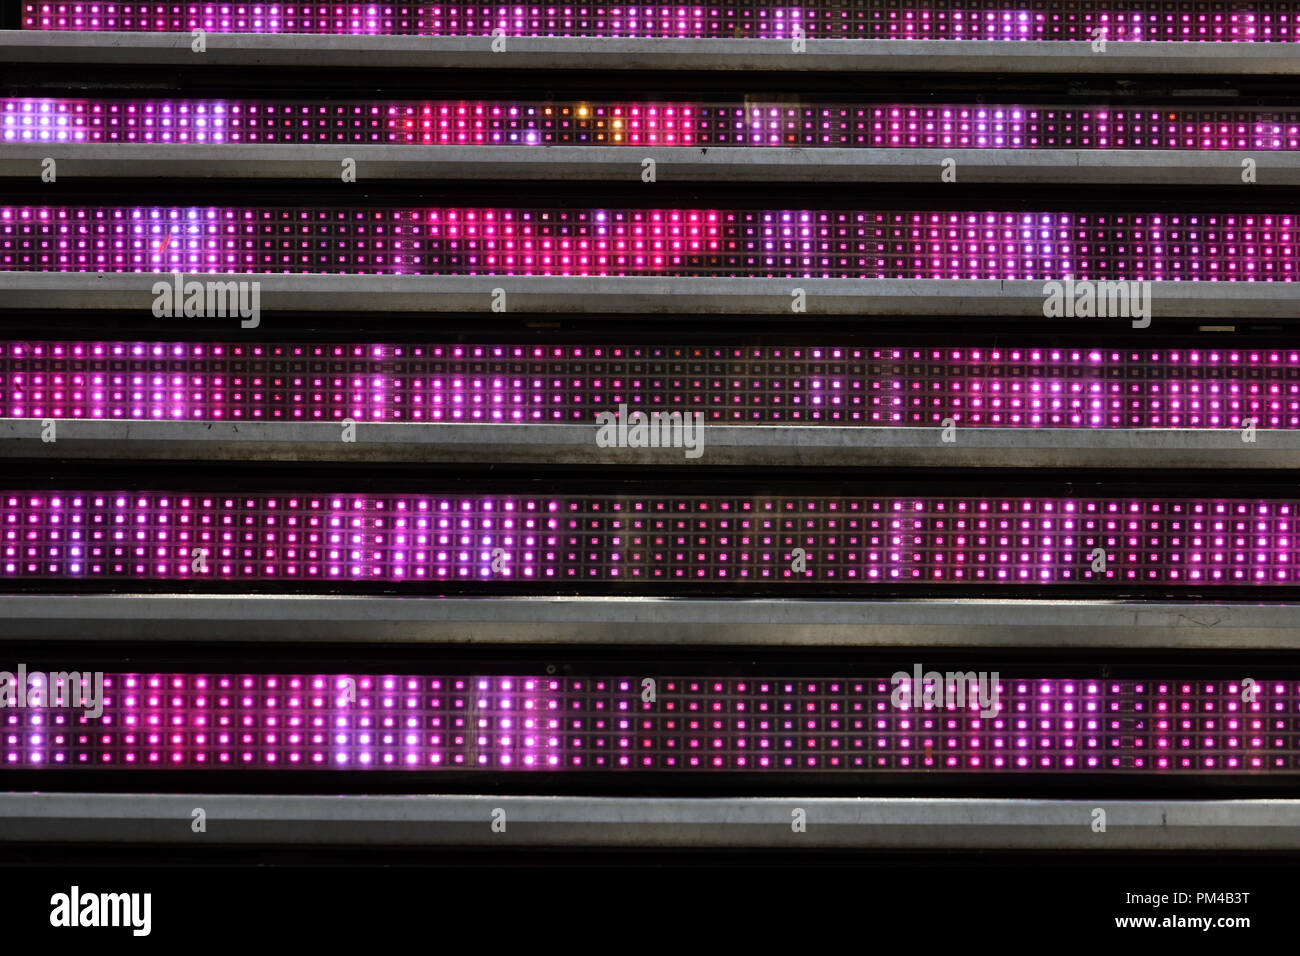 Abstract Image Showing Multiple Rows Of Led Lights Between Stairs Stock Photo